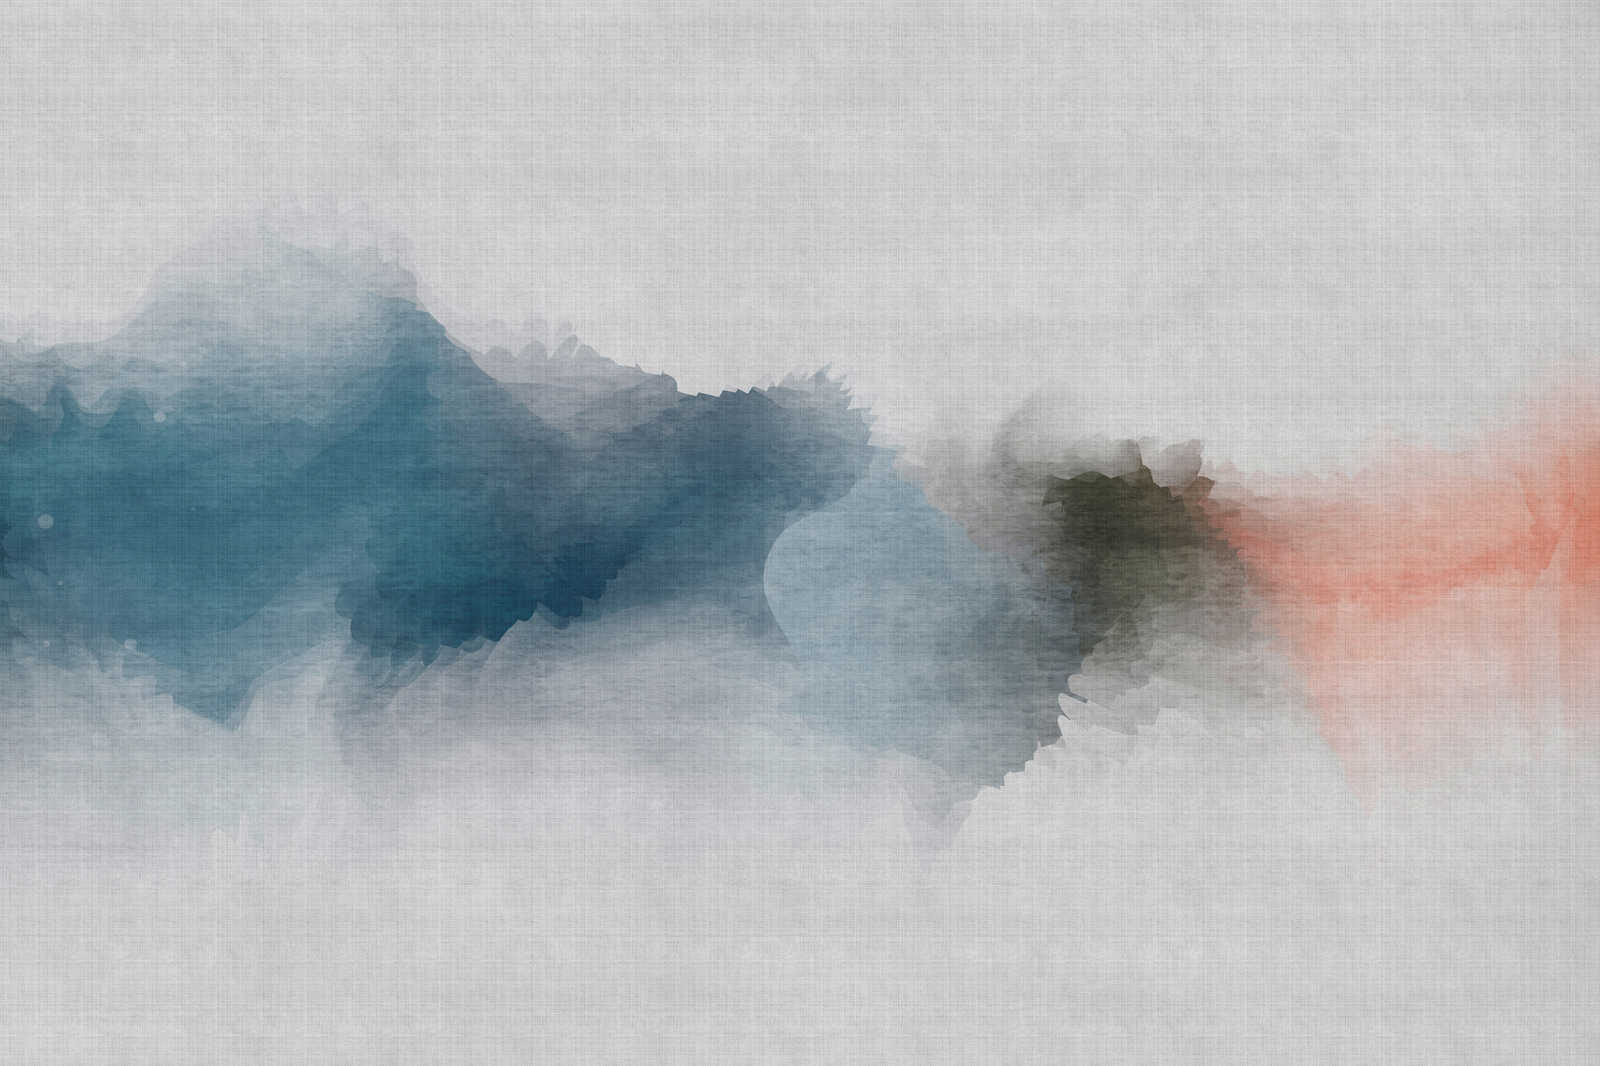             Daydream 1 - Minimalist Watercolour Style Canvas Painting - Nature Linen Texture - 0.90 m x 0.60 m
        